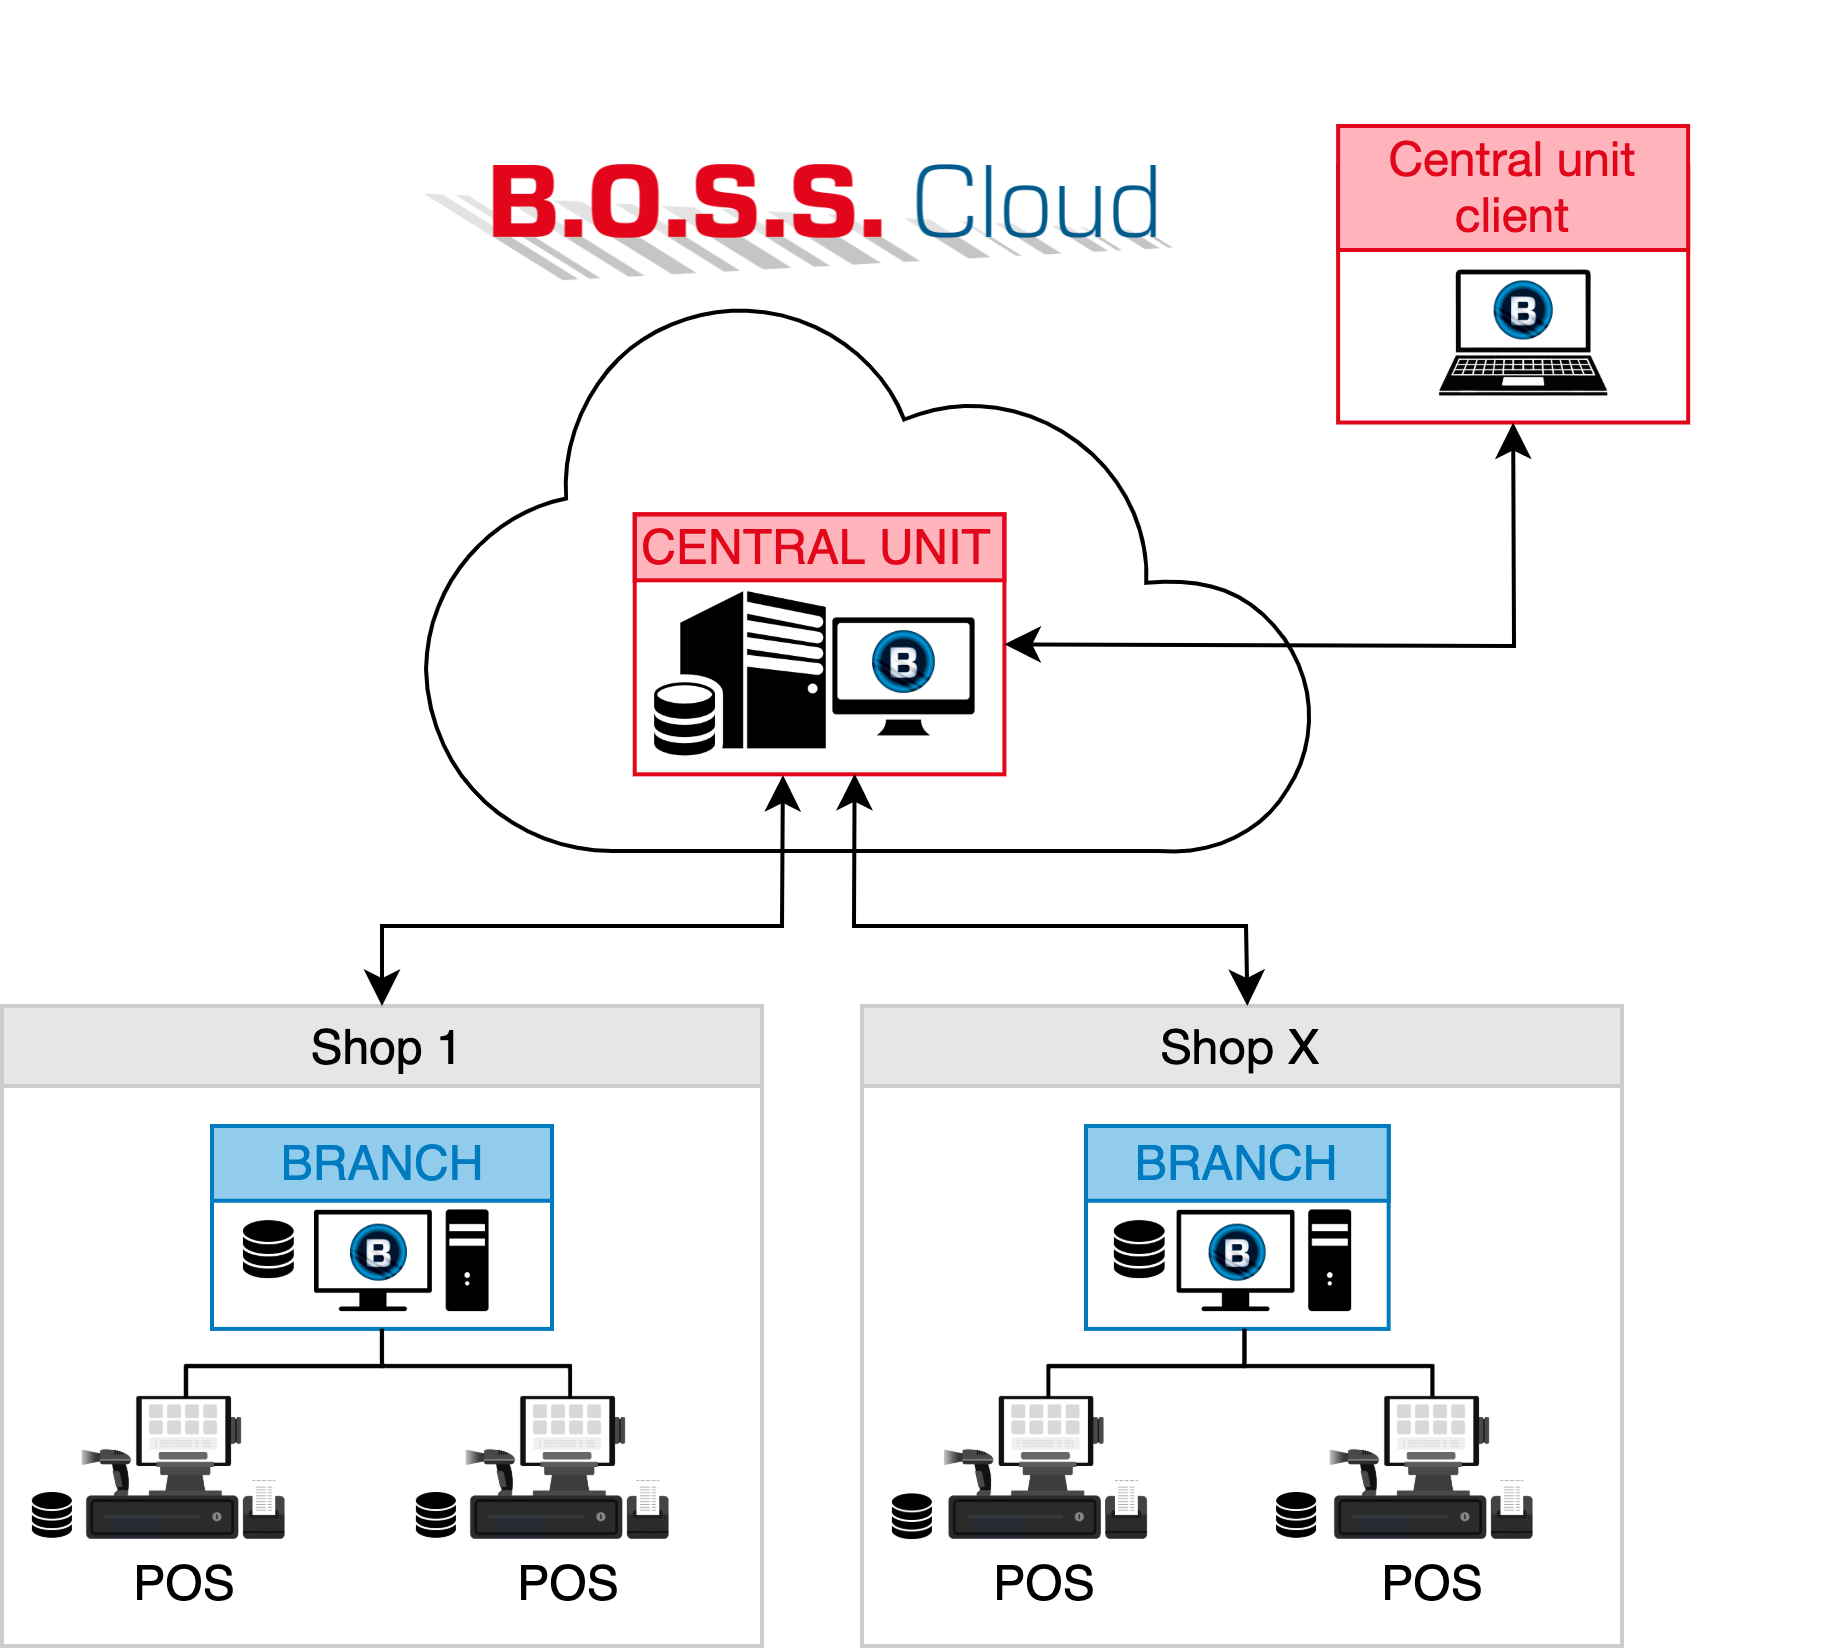 Central unit in cloud when using the cloud architecture